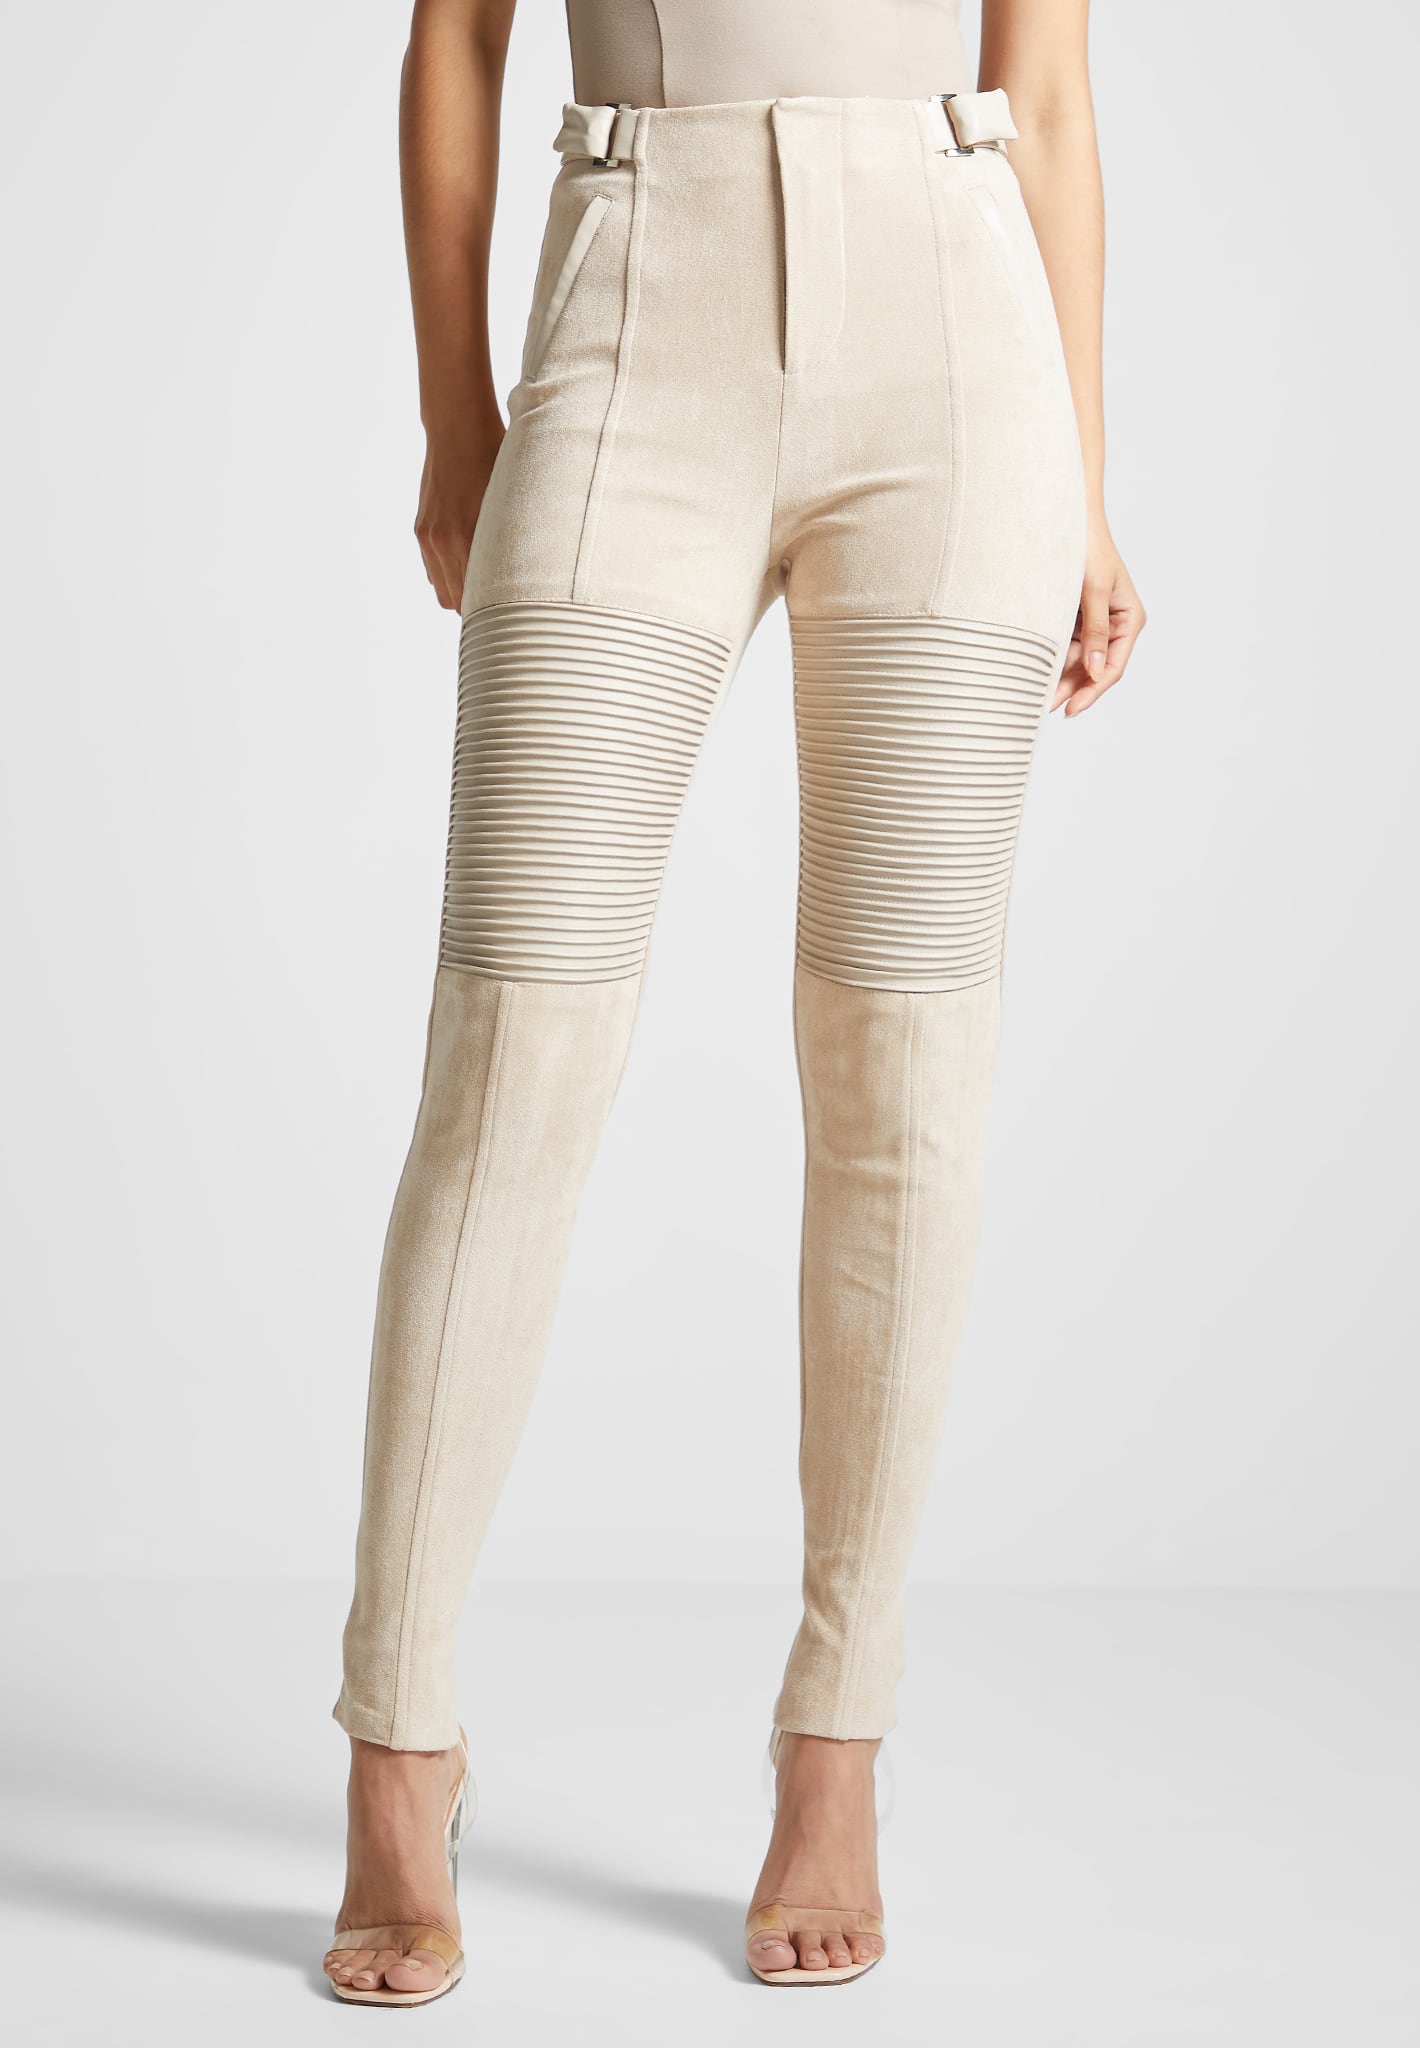 Vegan Leather and Suede Ribbed Leggings - Beige